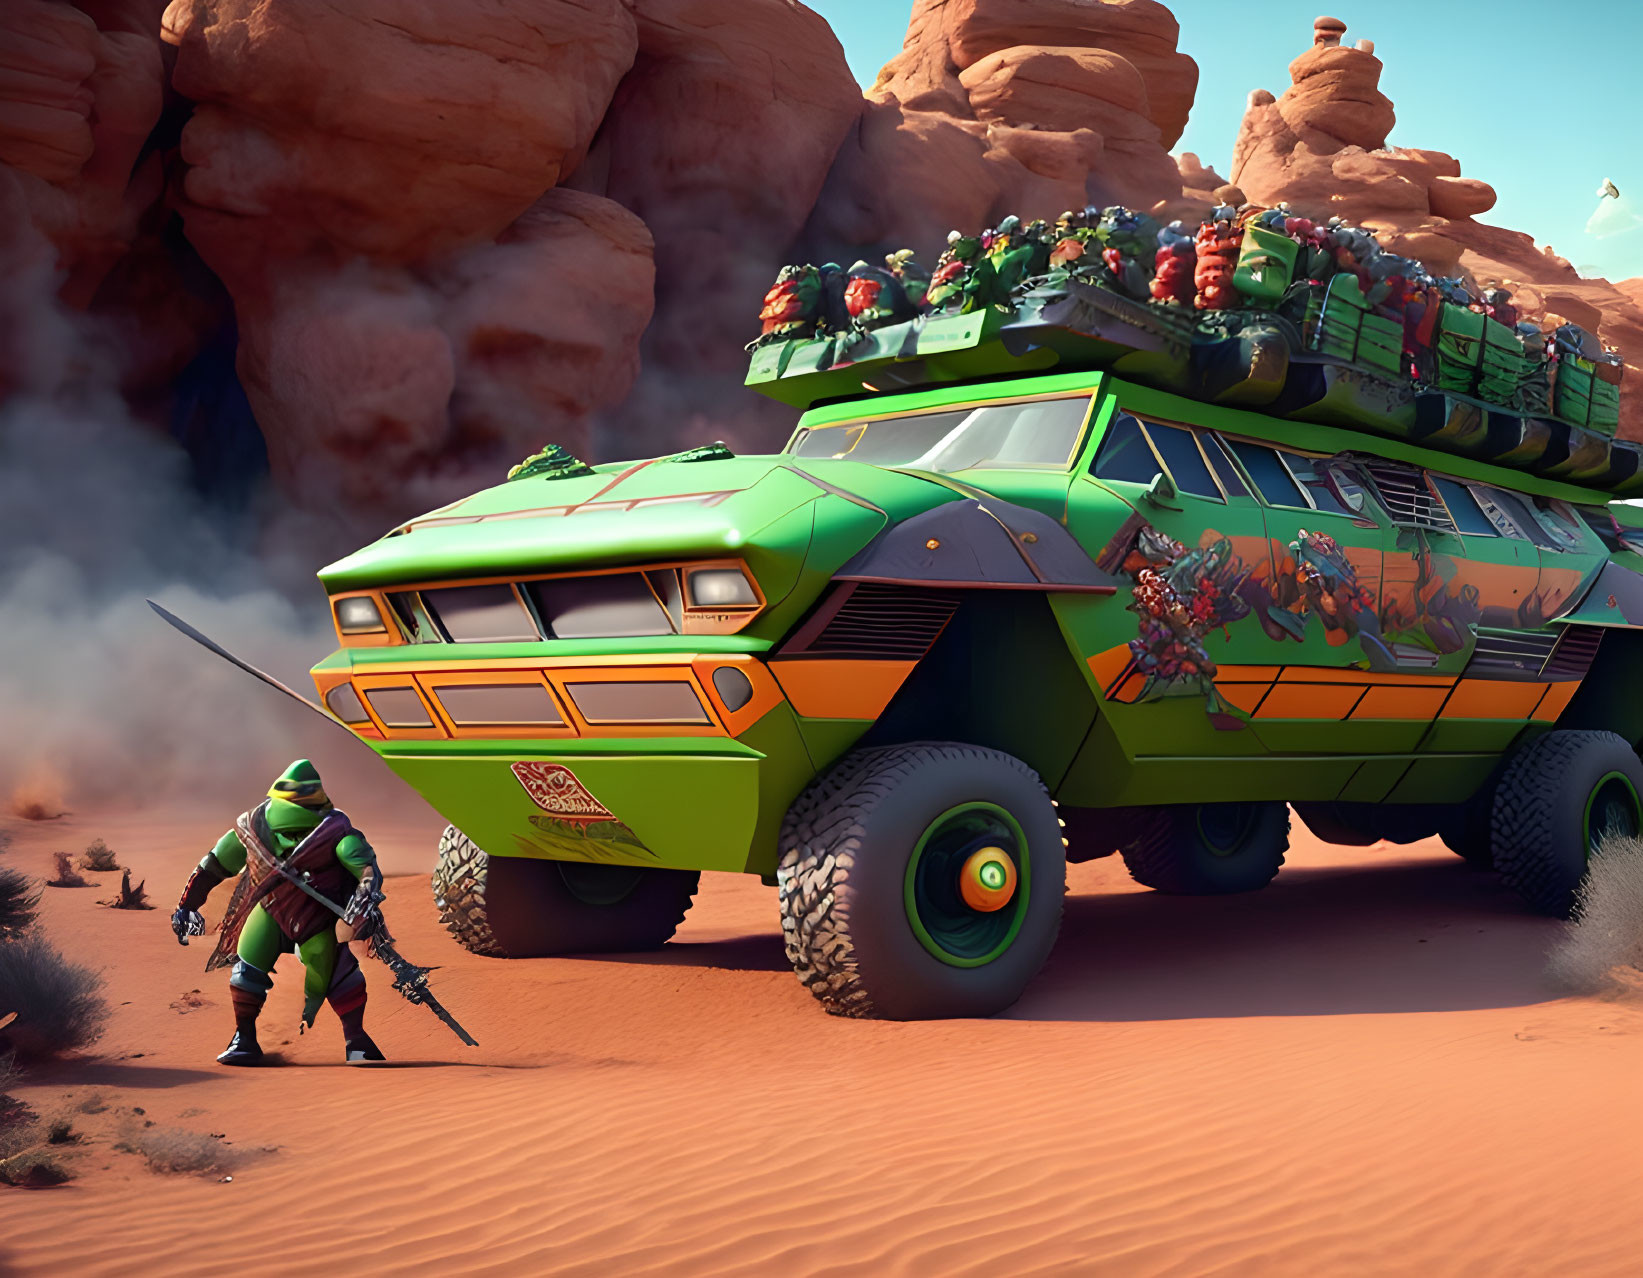 Futuristic green armored vehicle in desert with soldier and red graffiti